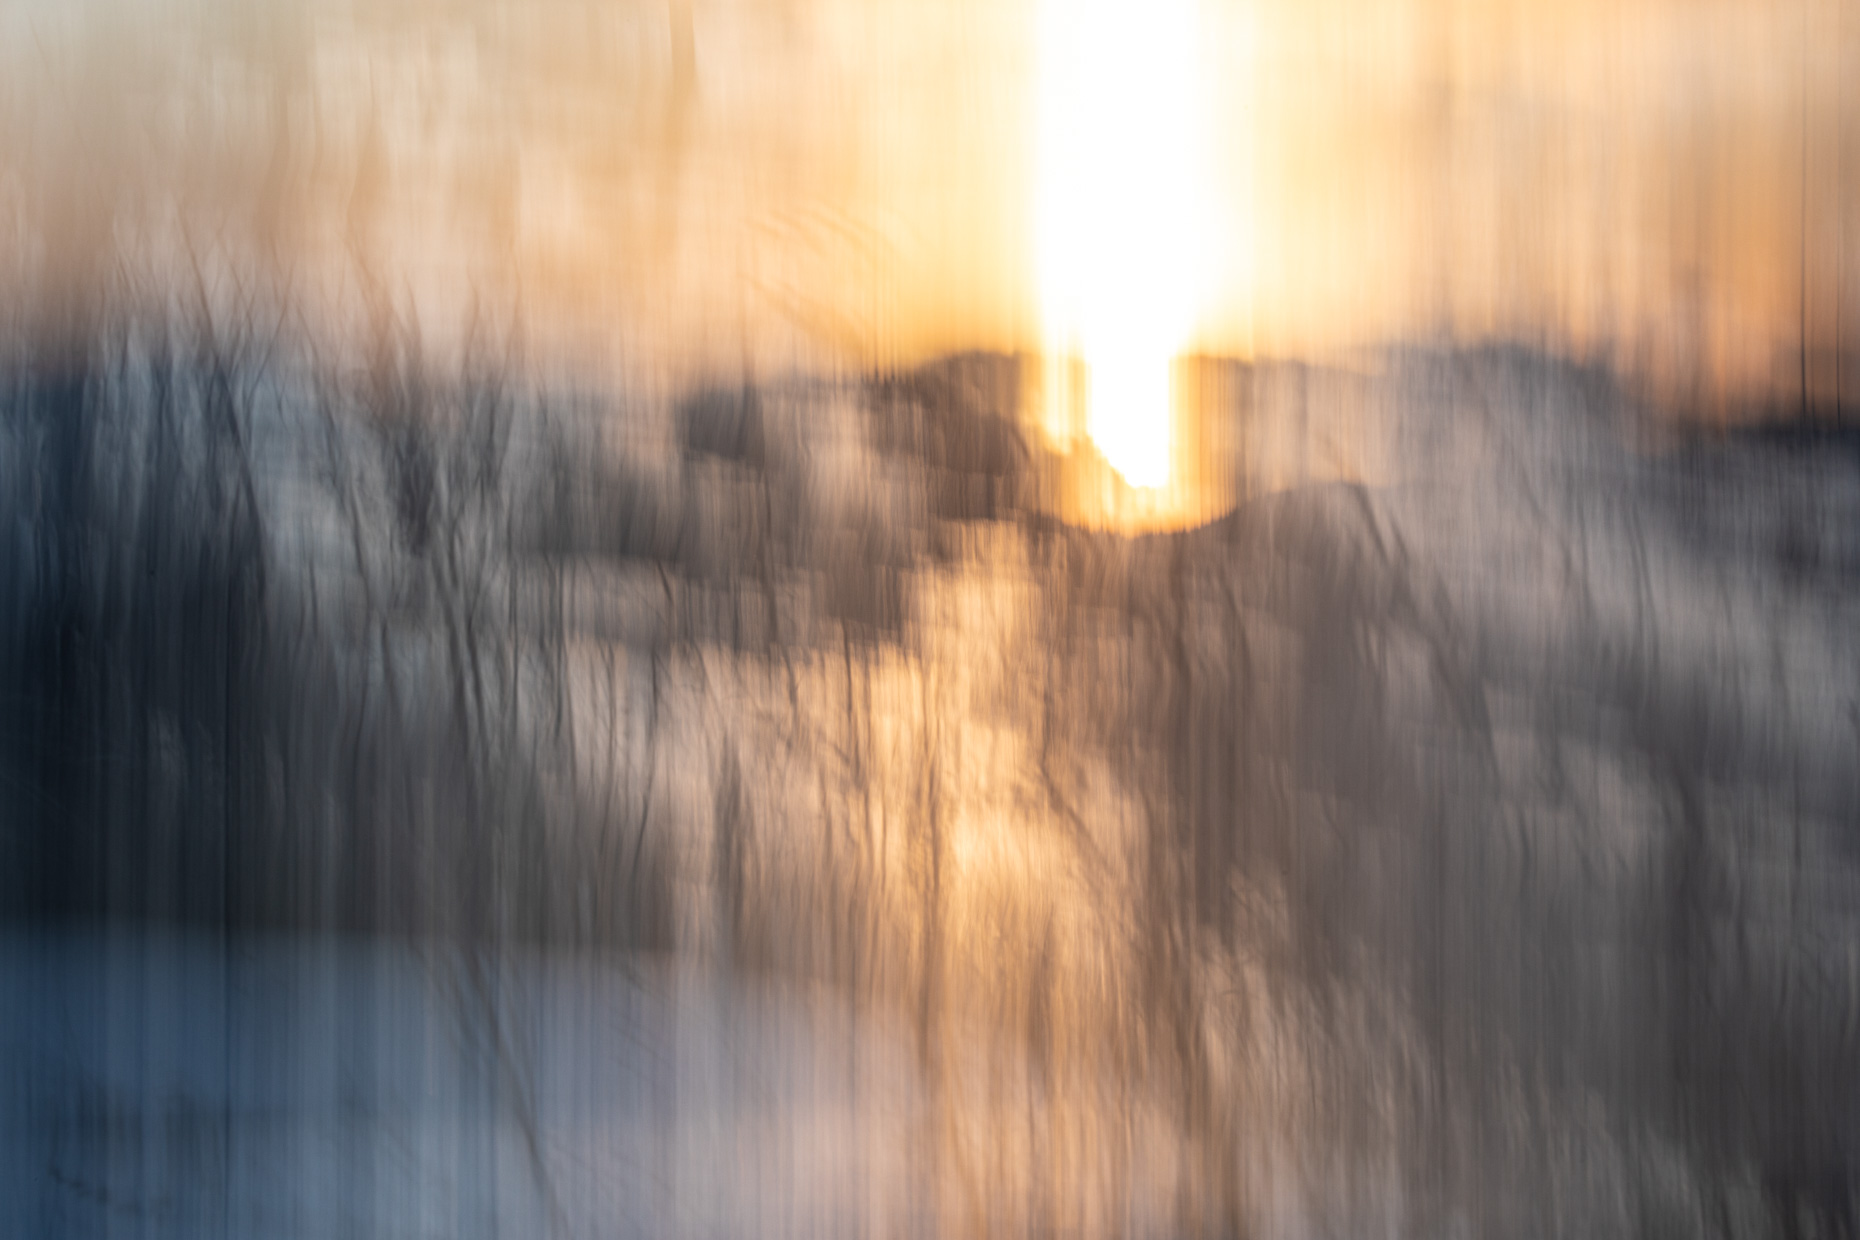 climate_change_winter_ice_Saint_Lawrence_River_Quebec_ICM_intentional_camera_movement-15